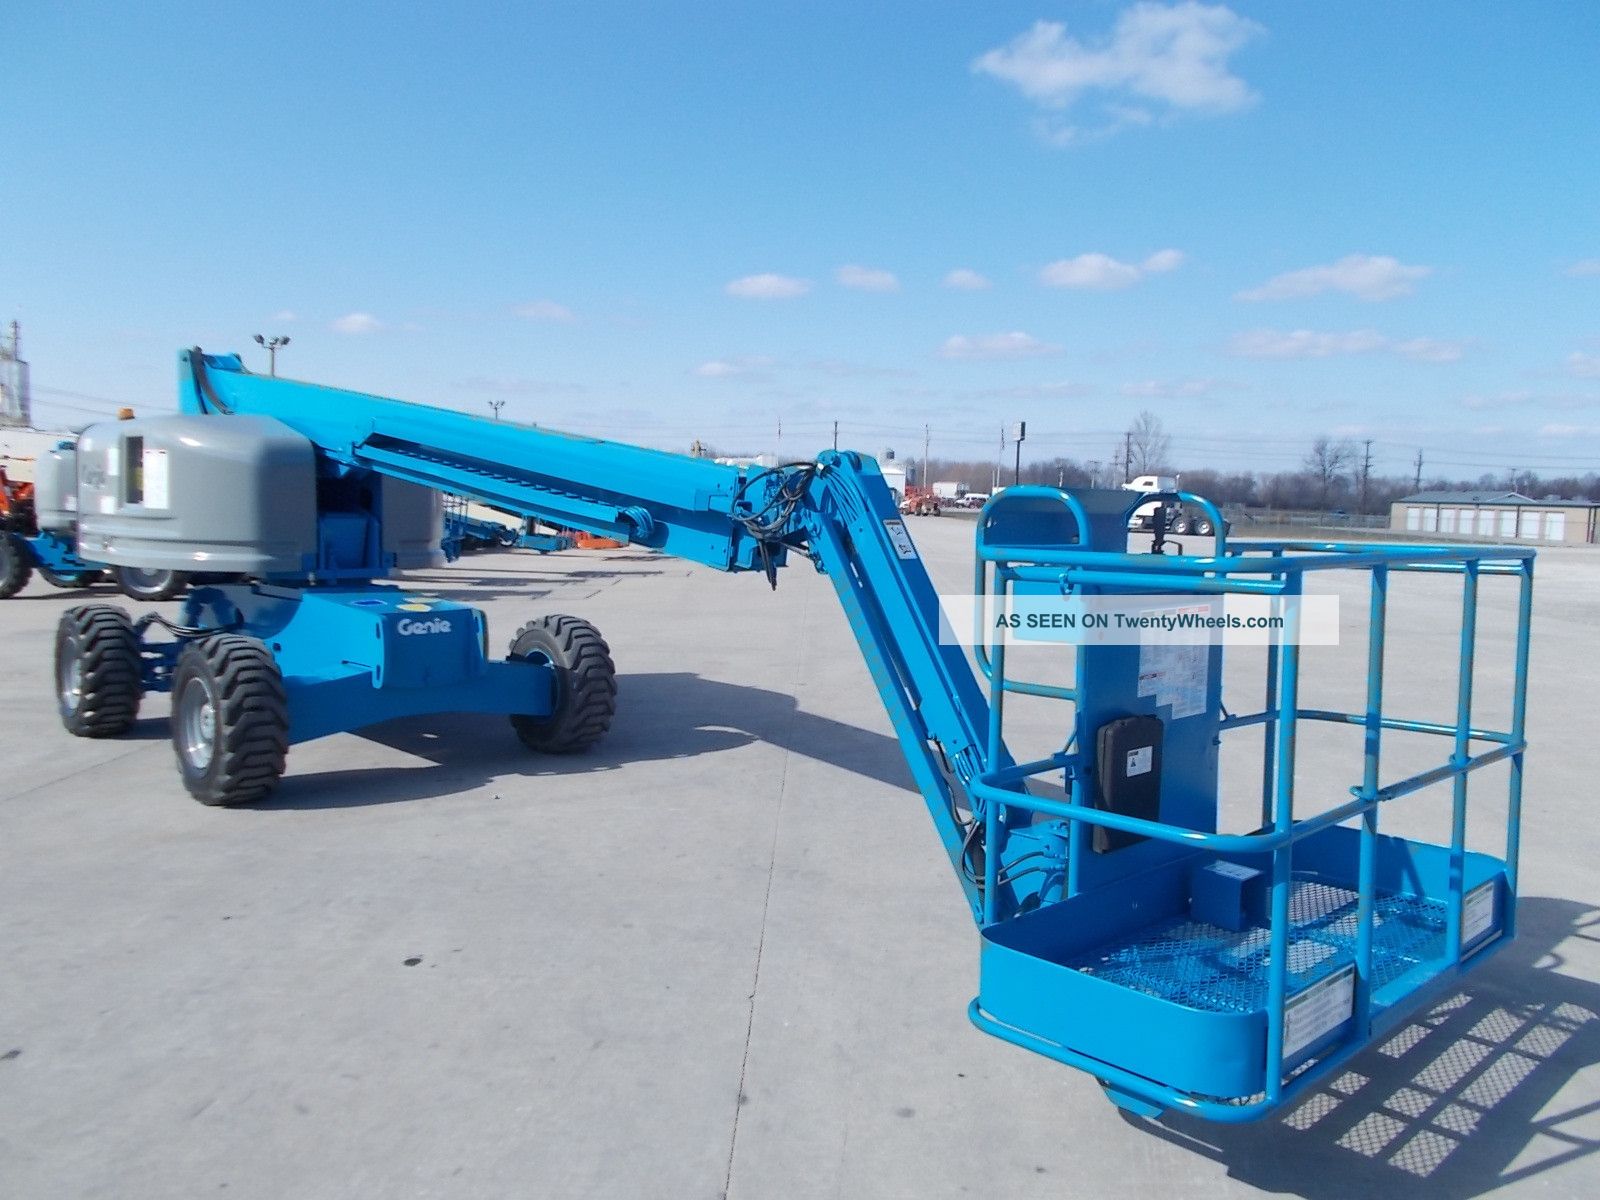 Genie S45 Aerial Manlift Boom Lift Man Boomlift Painted 45 Foot Lift Height Lifts photo